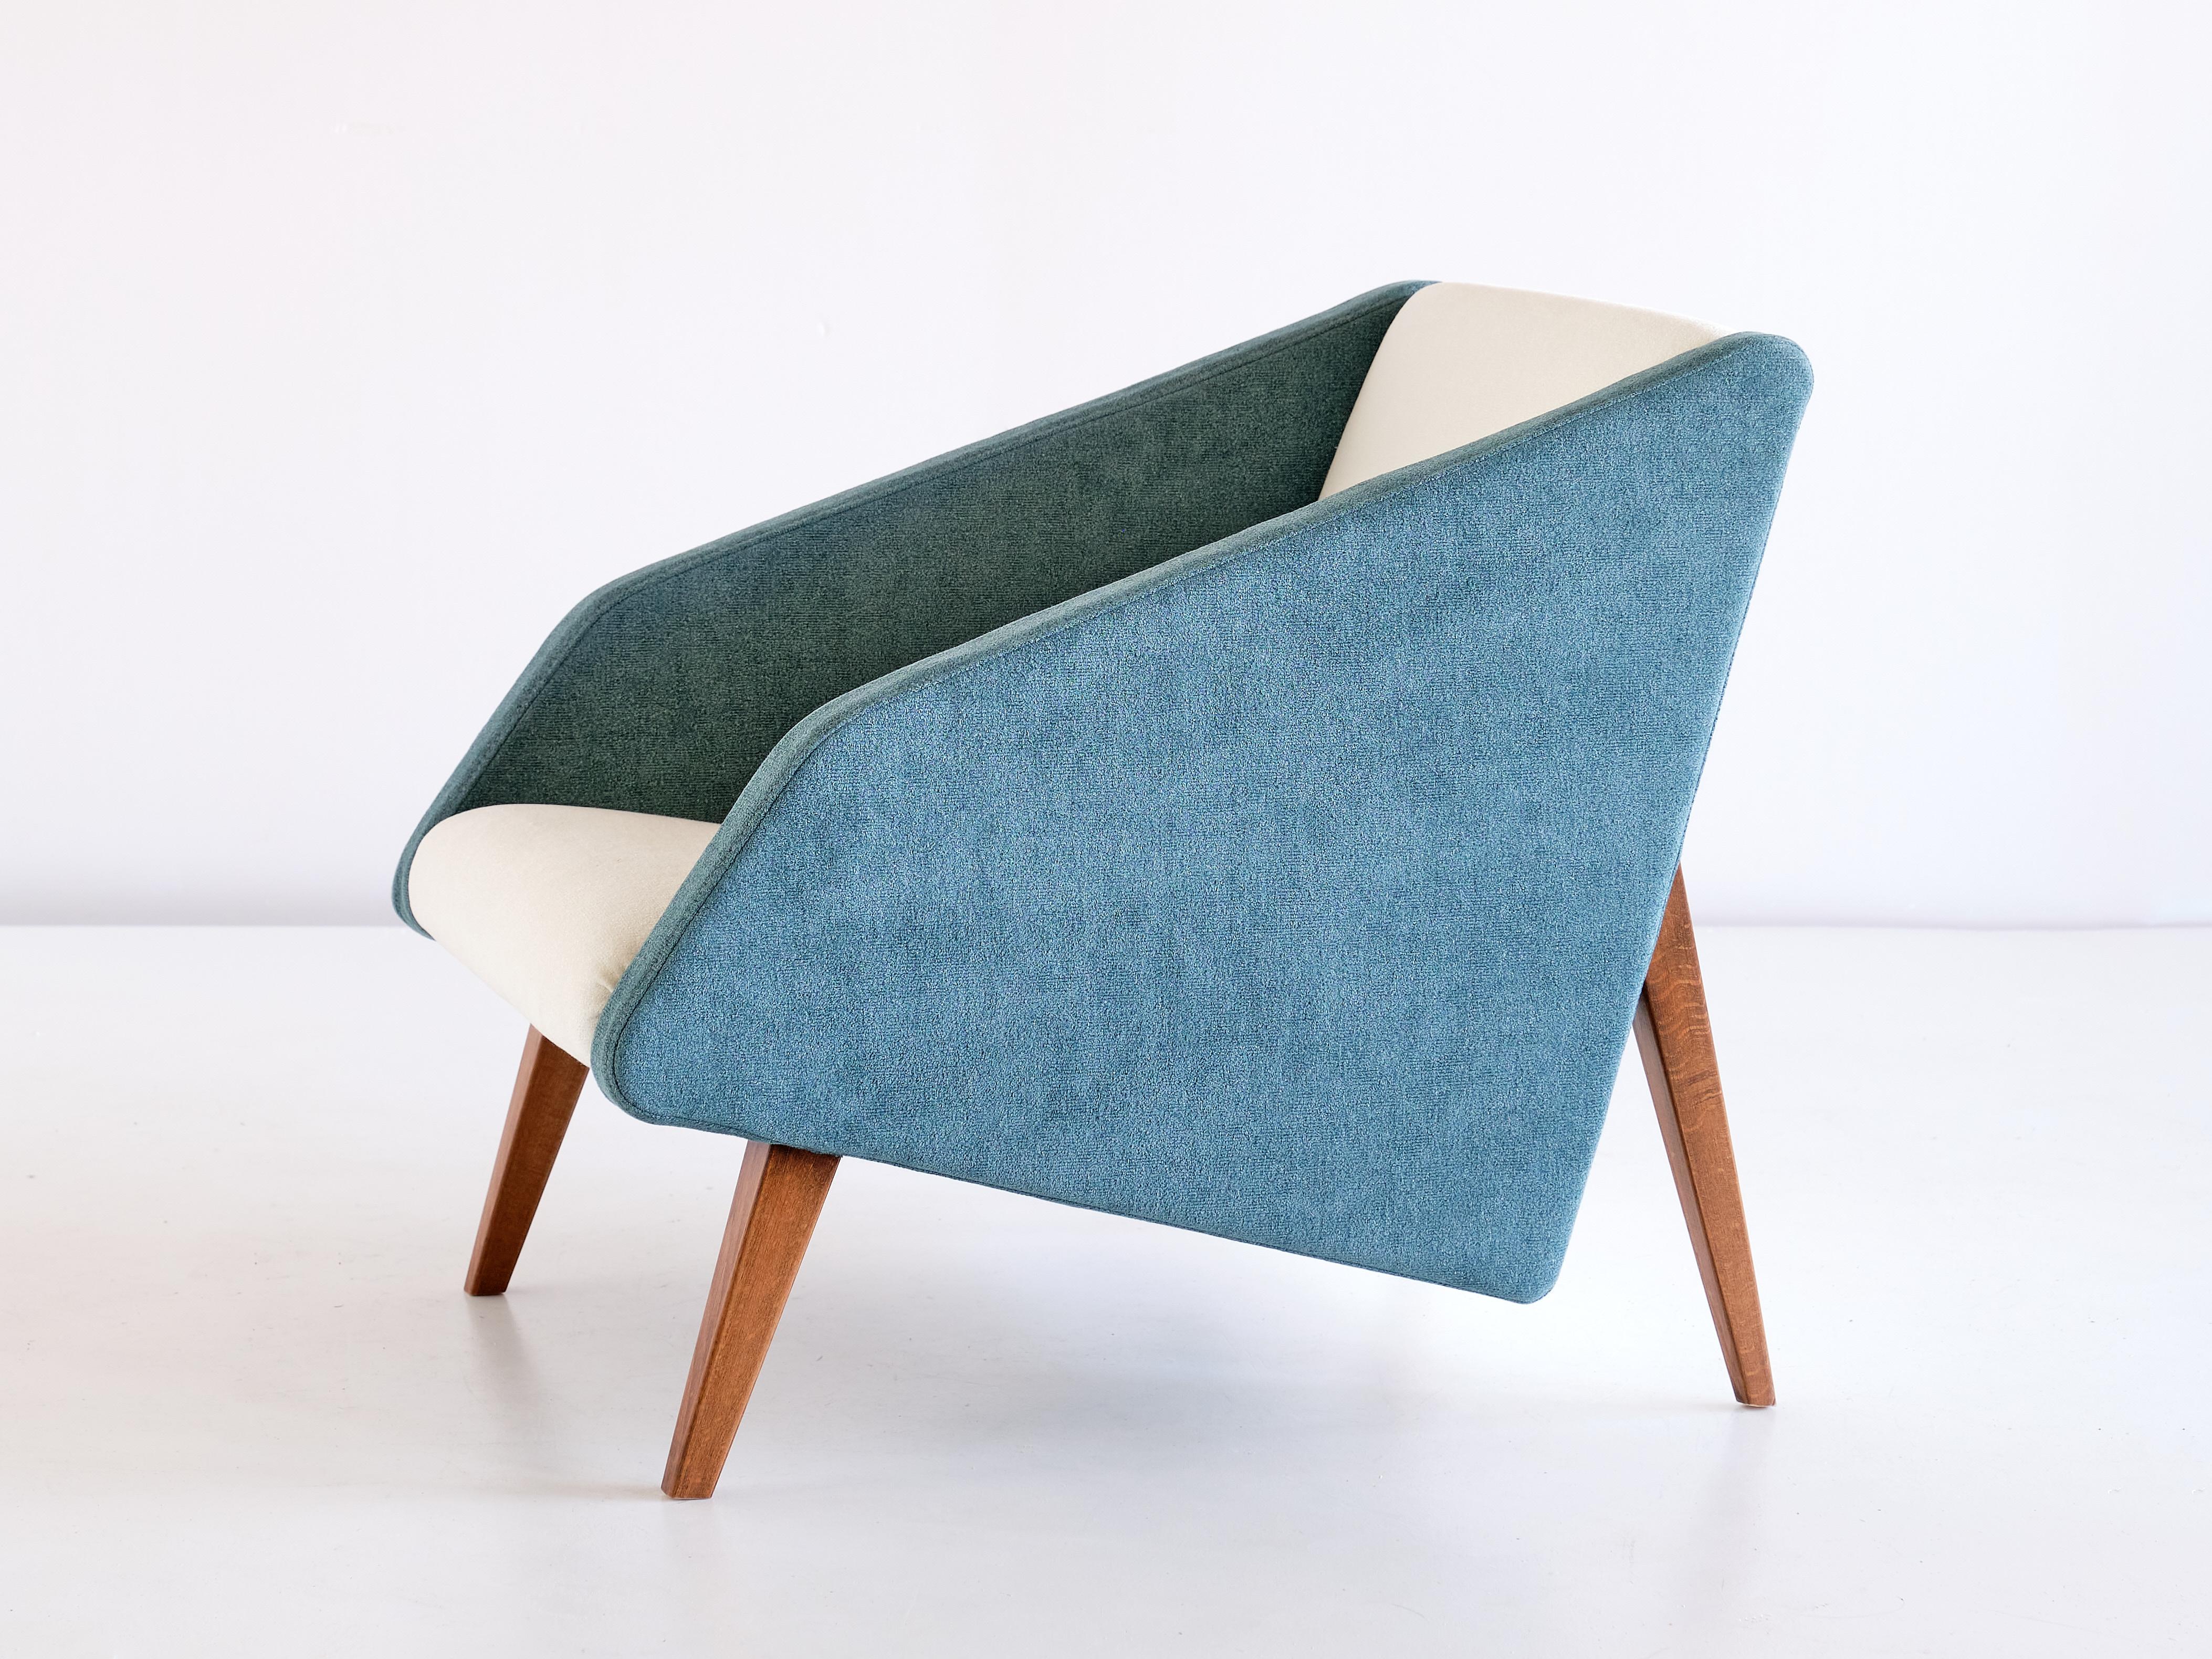 Gio Ponti Attributed Armchair in Lelièvre Fabric and Beech, Italy, Late, 1950s For Sale 1